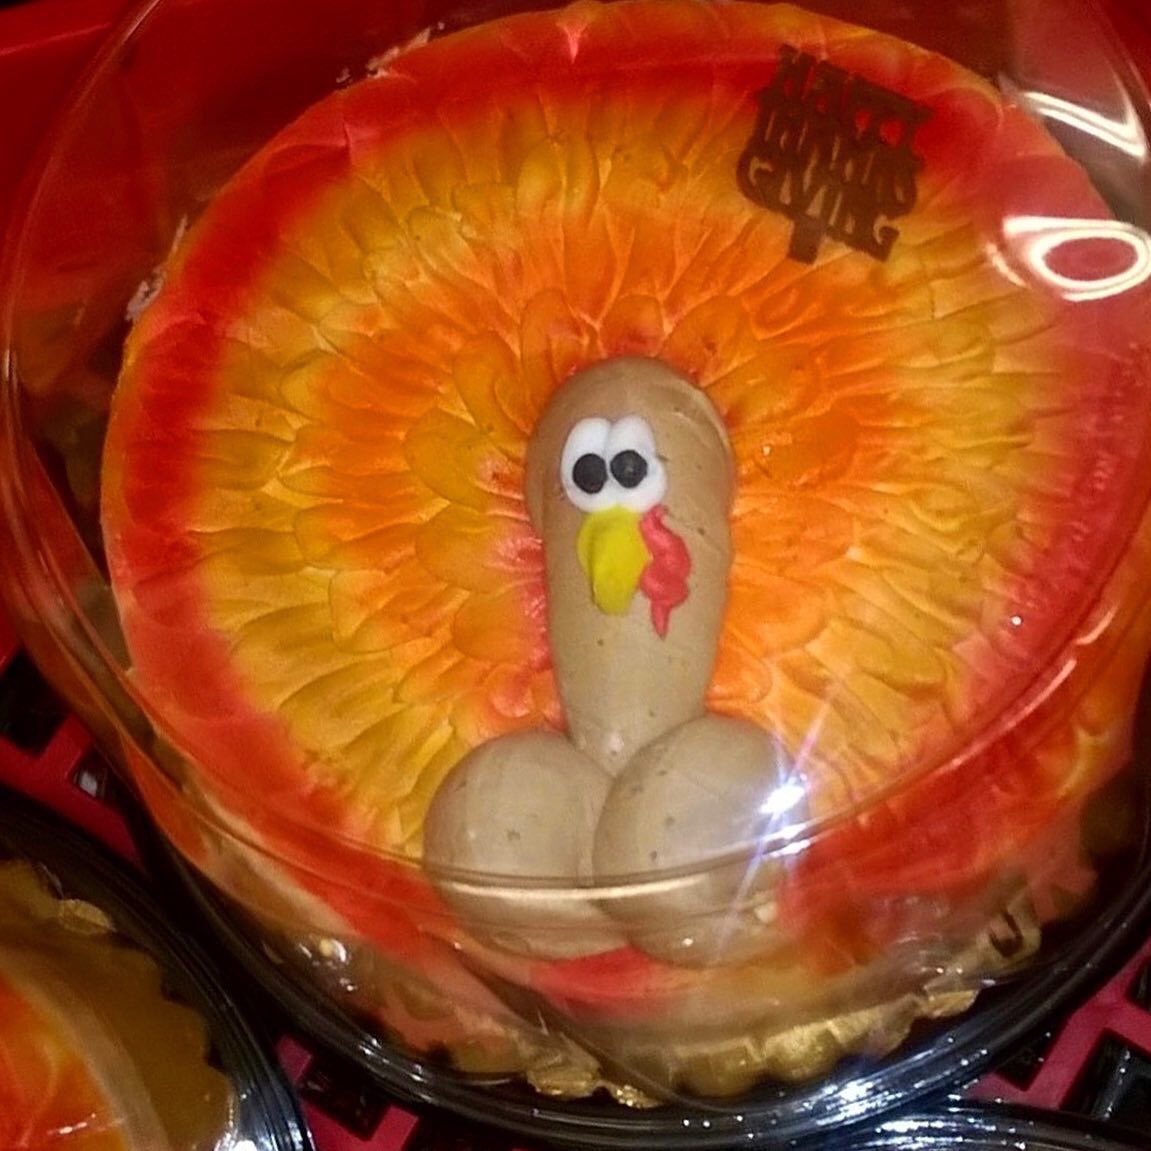 This festive turkey (or is it penis?) cake is just another salvo in the. pi...